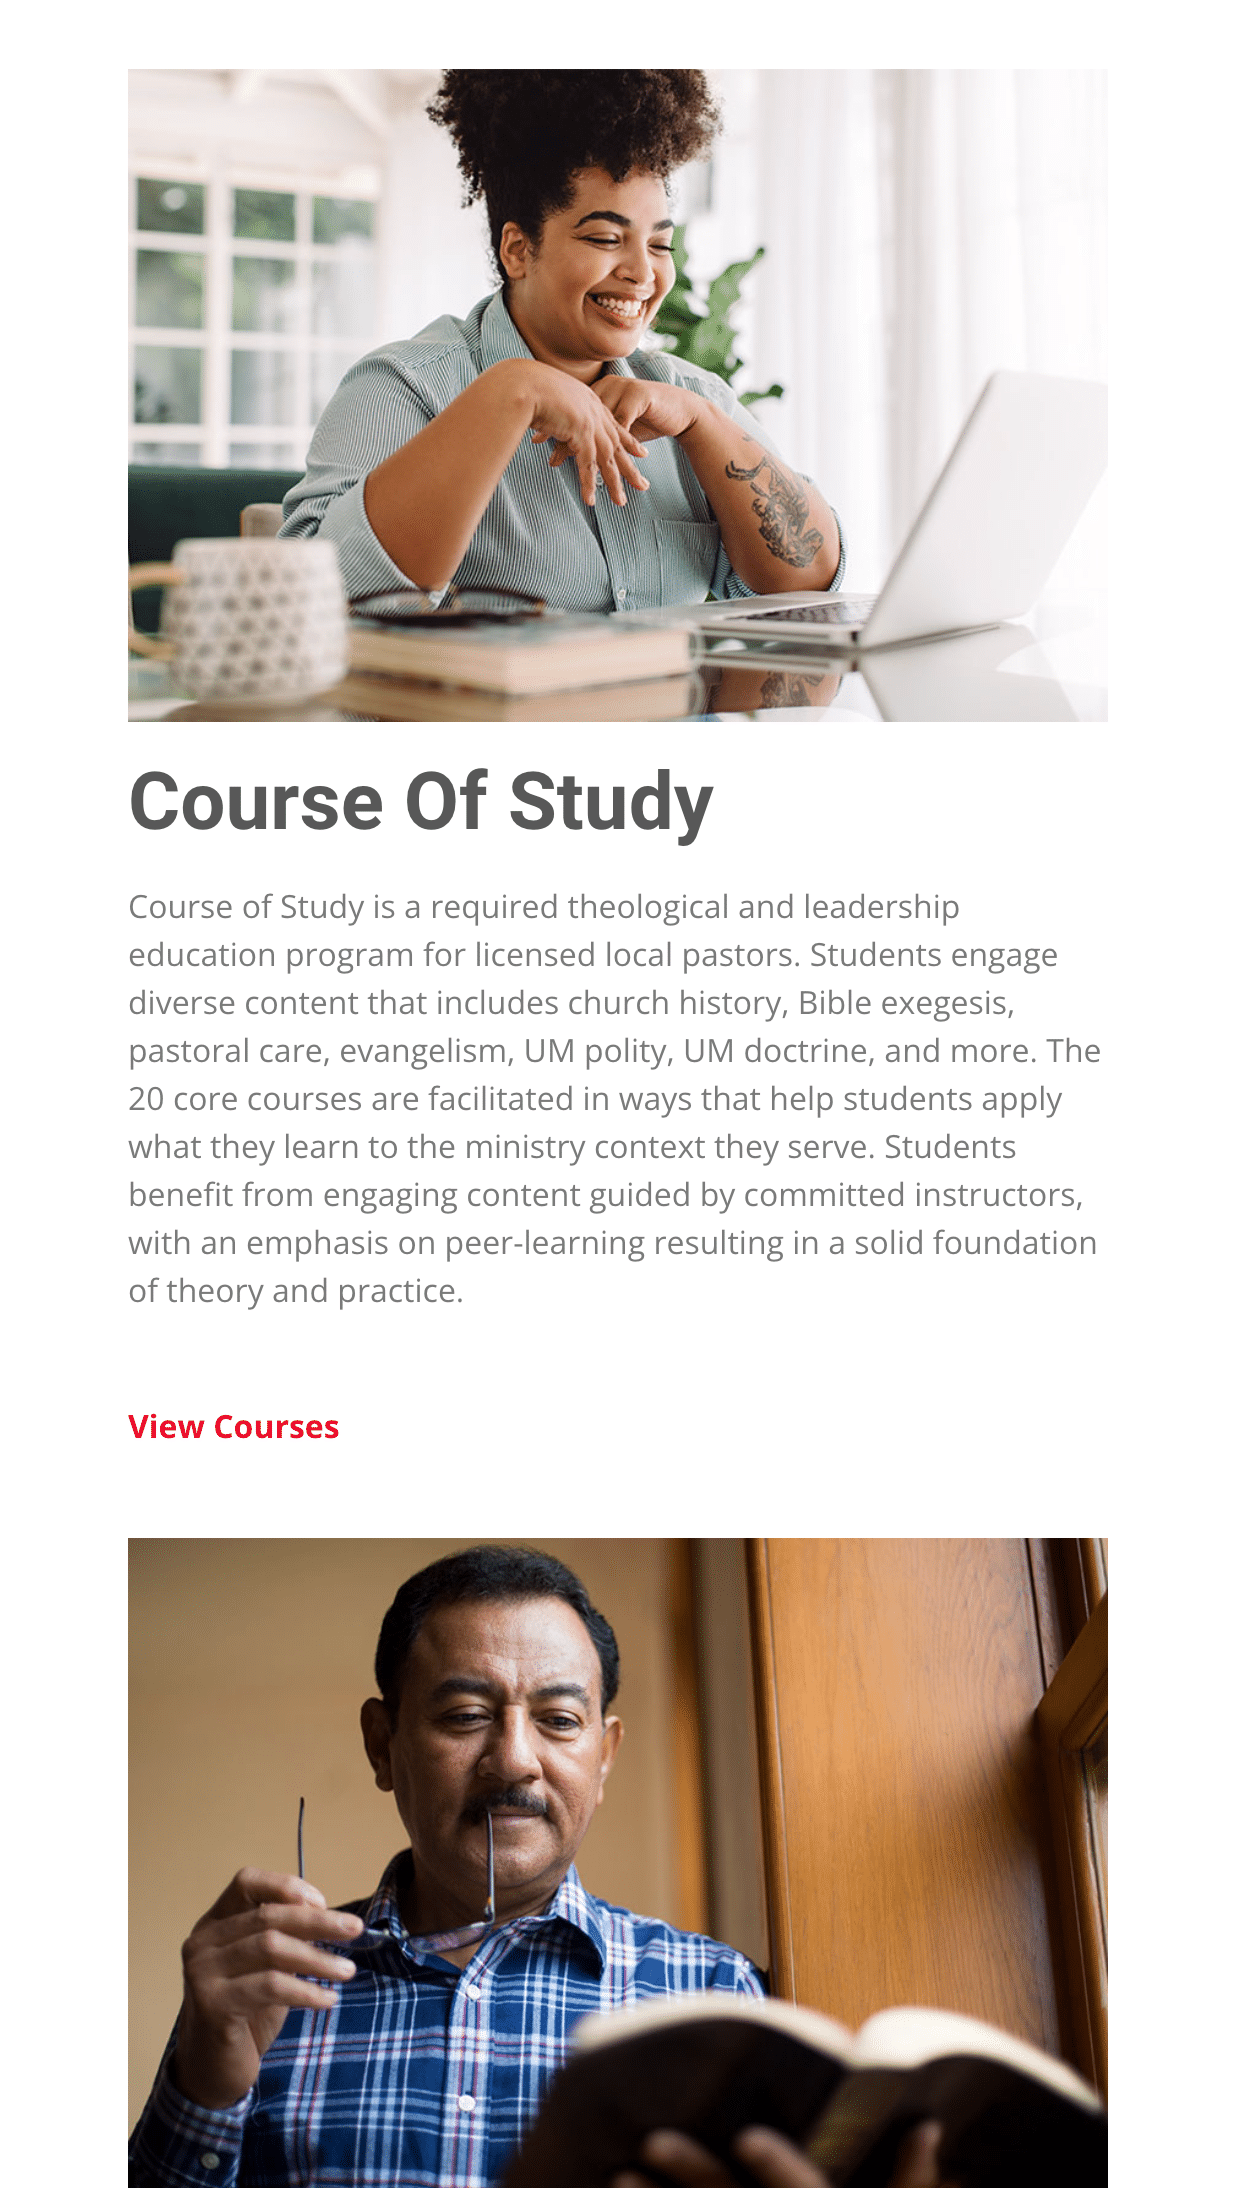 GBHEM webpage for Course of Study with an image of a person smiling at a laptop on the top and a person reading at the bottom.